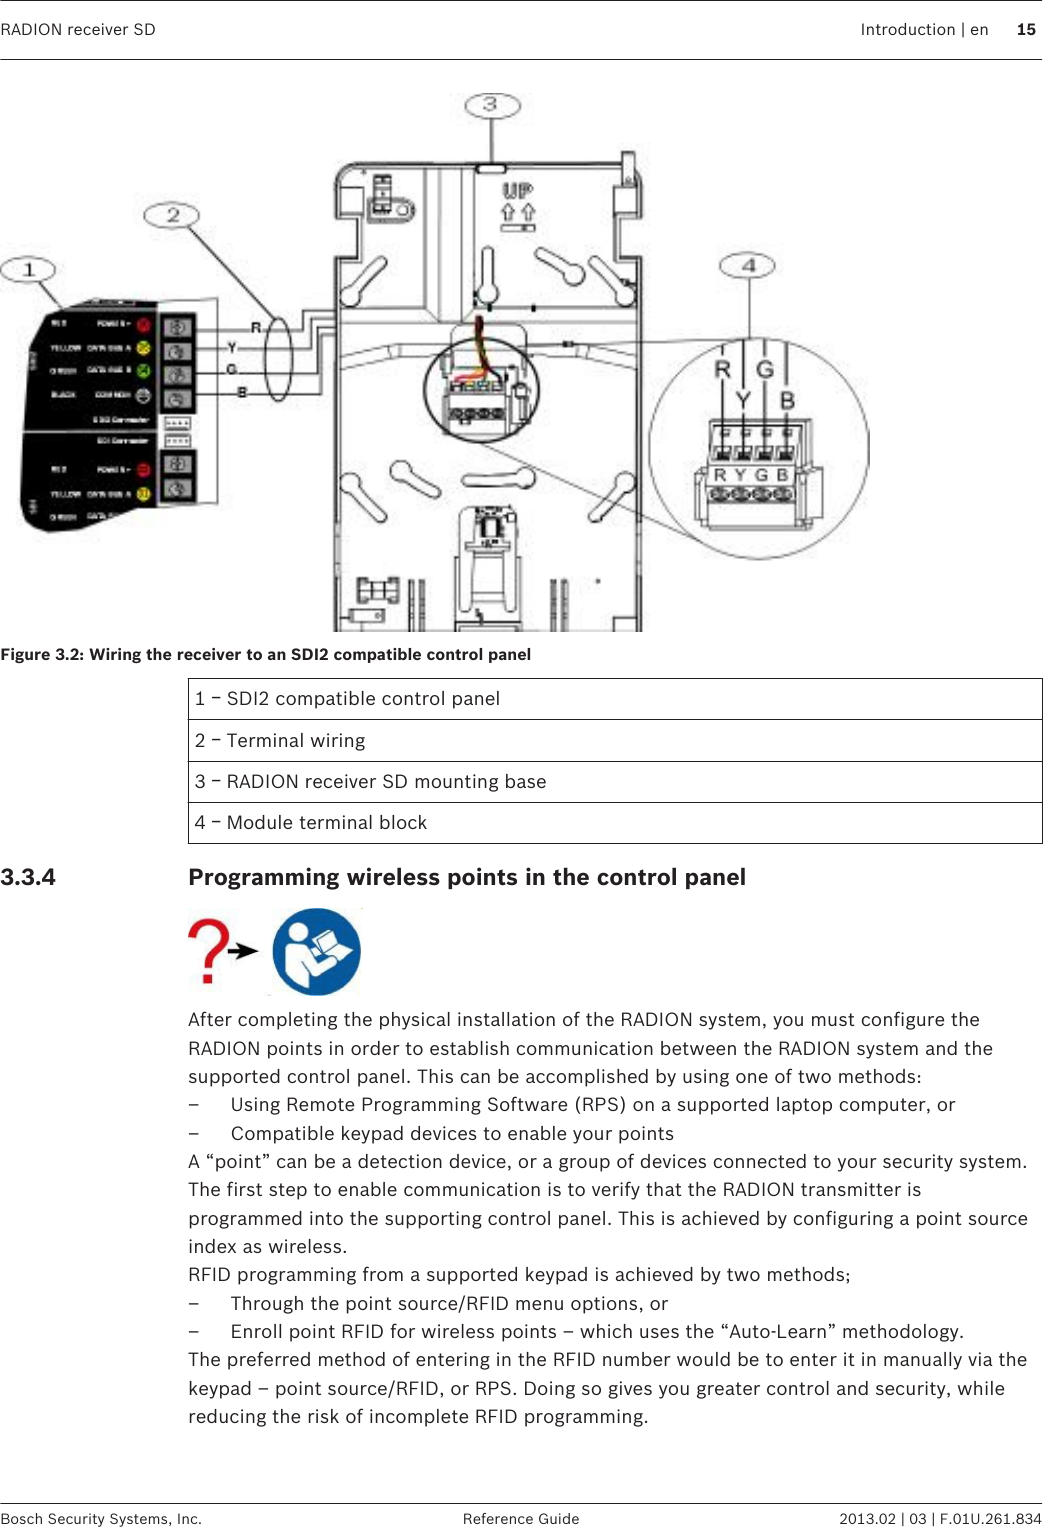 Figure 3.2: Wiring the receiver to an SDI2 compatible control panel1 ￚ SDI2 compatible control panel2 ￚ Terminal wiring3 ￚ RADION receiver SD mounting base4 ￚ Module terminal blockProgramming wireless points in the control panelAfter completing the physical installation of the RADION system, you must configure theRADION points in order to establish communication between the RADION system and thesupported control panel. This can be accomplished by using one of two methods:– Using Remote Programming Software (RPS) on a supported laptop computer, or– Compatible keypad devices to enable your pointsA “point” can be a detection device, or a group of devices connected to your security system.The first step to enable communication is to verify that the RADION transmitter isprogrammed into the supporting control panel. This is achieved by configuring a point sourceindex as wireless.RFID programming from a supported keypad is achieved by two methods;– Through the point source/RFID menu options, or– Enroll point RFID for wireless points – which uses the “Auto-Learn” methodology.The preferred method of entering in the RFID number would be to enter it in manually via thekeypad – point source/RFID, or RPS. Doing so gives you greater control and security, whilereducing the risk of incomplete RFID programming. 3.3.4RADION receiver SD Introduction | en 15Bosch Security Systems, Inc. Reference Guide 2013.02 | 03 | F.01U.261.834